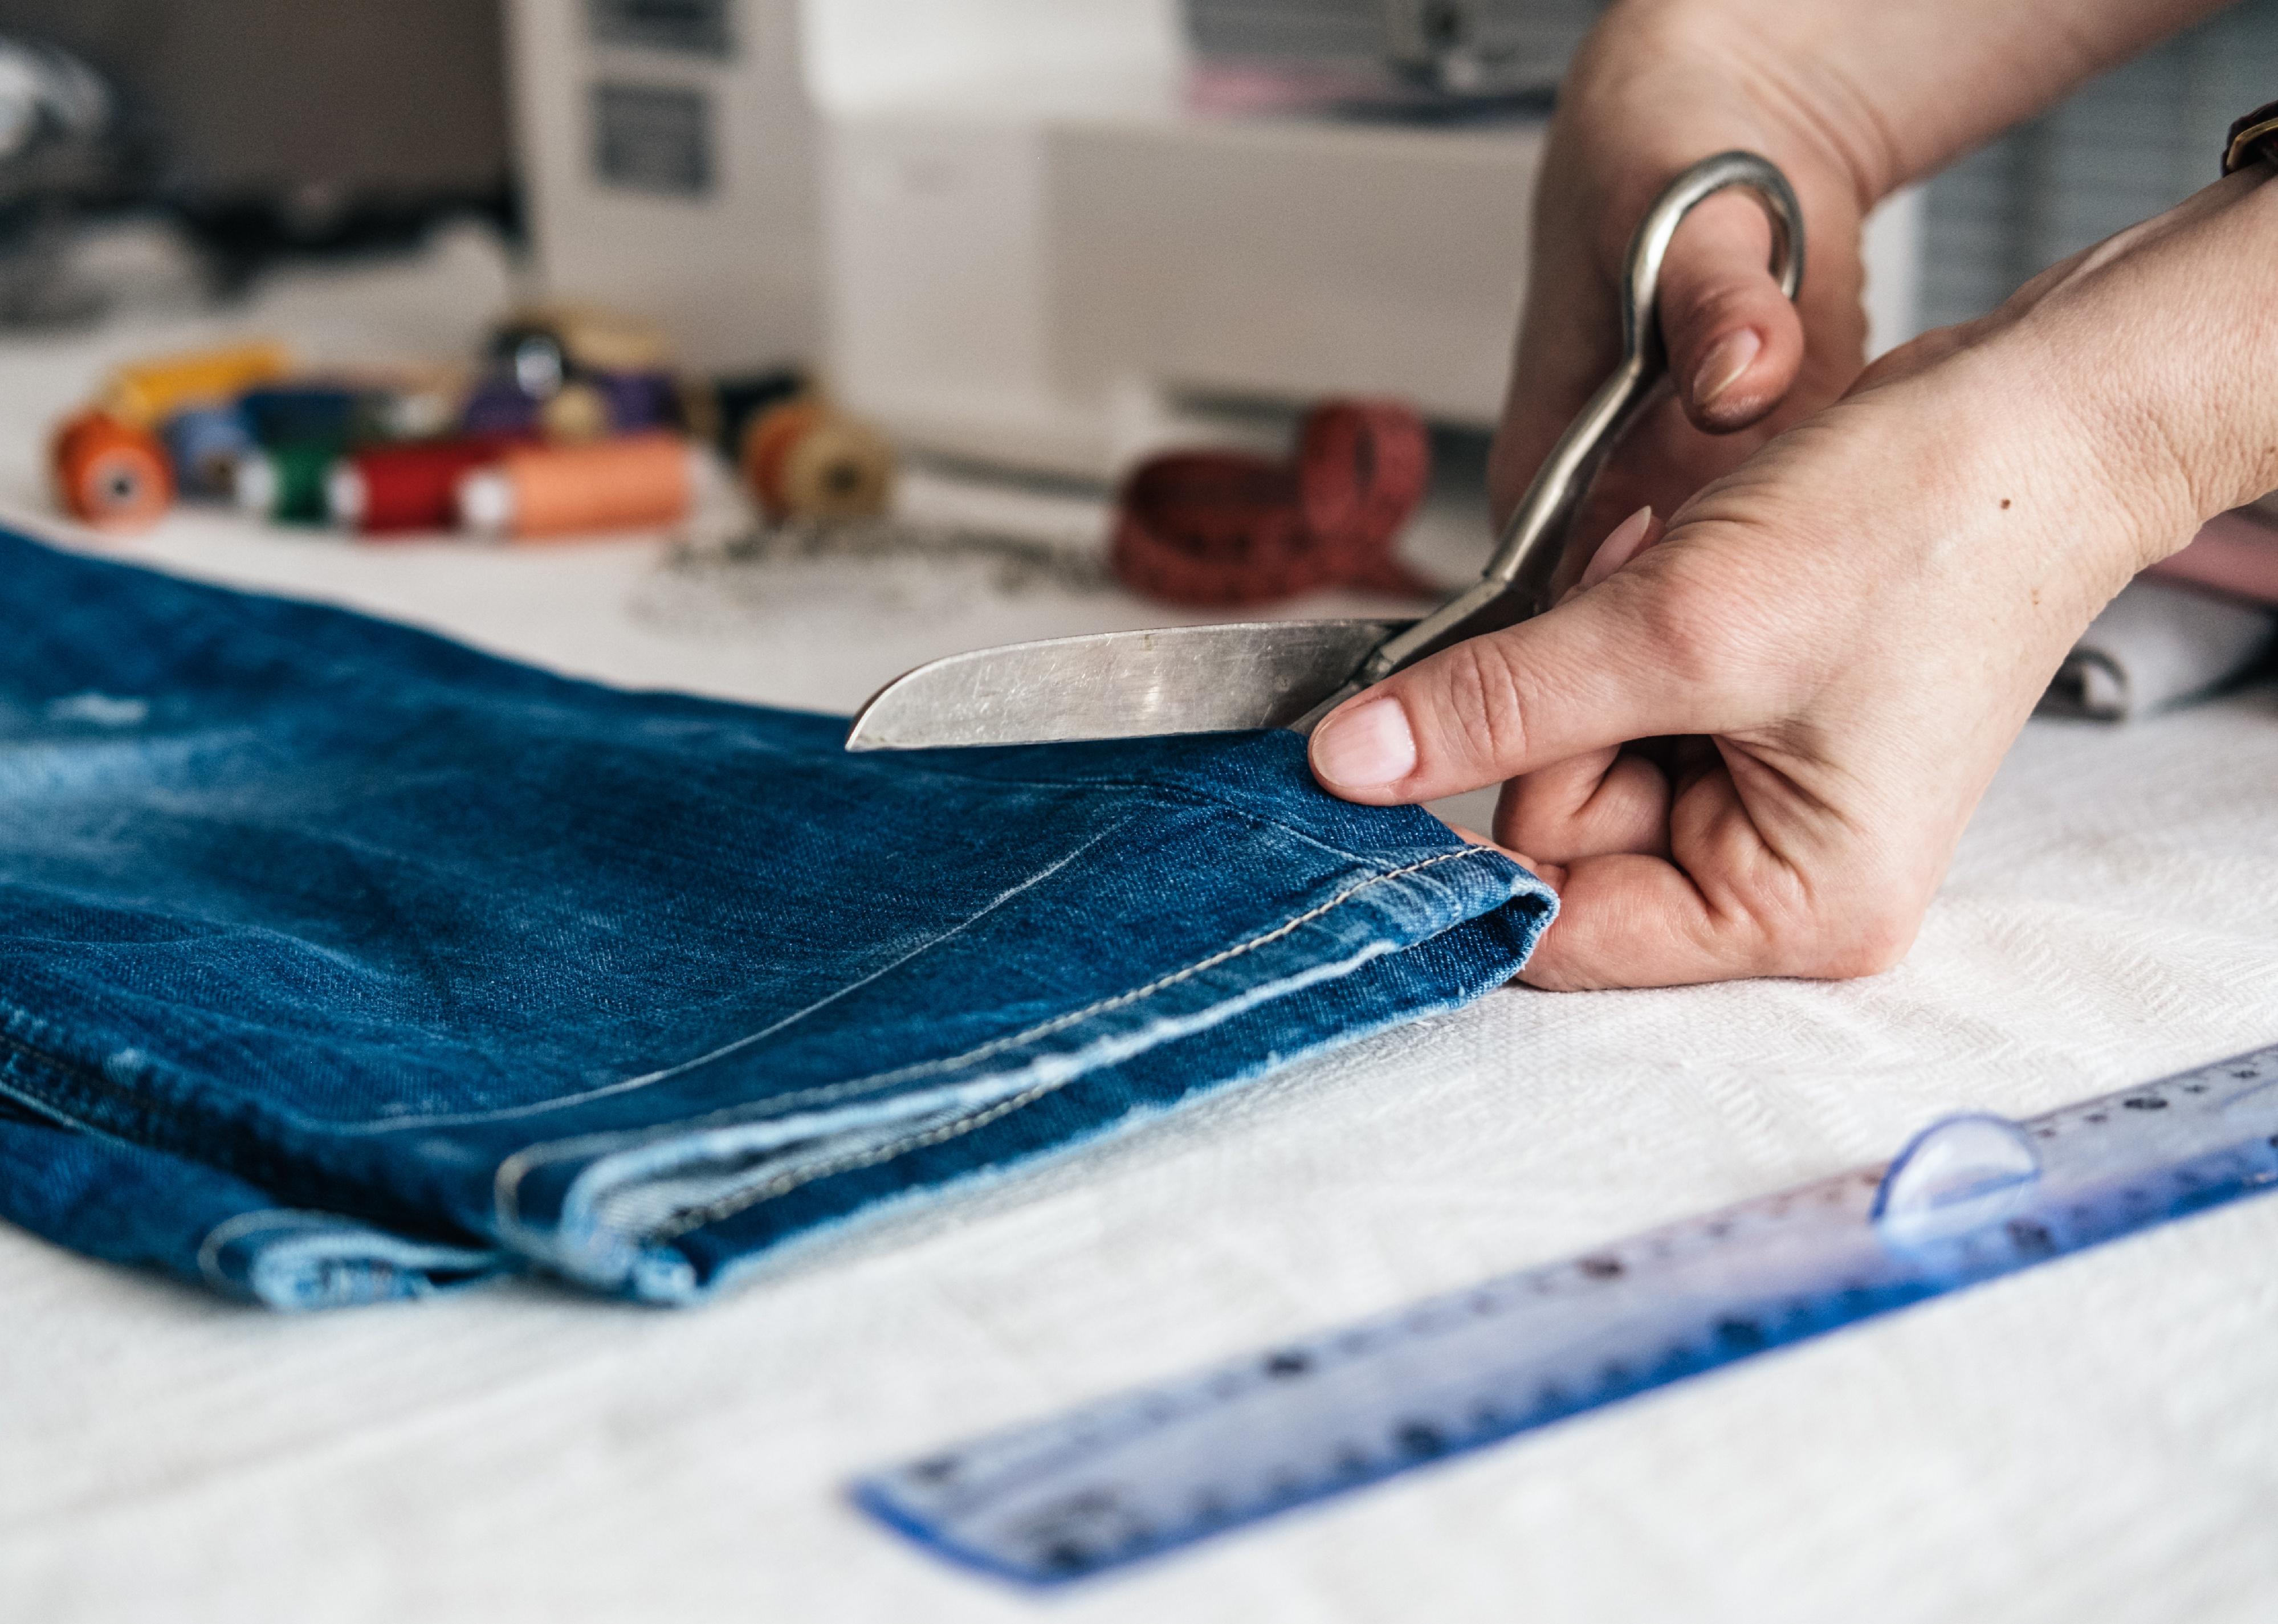 Image of hand cutting jeans.